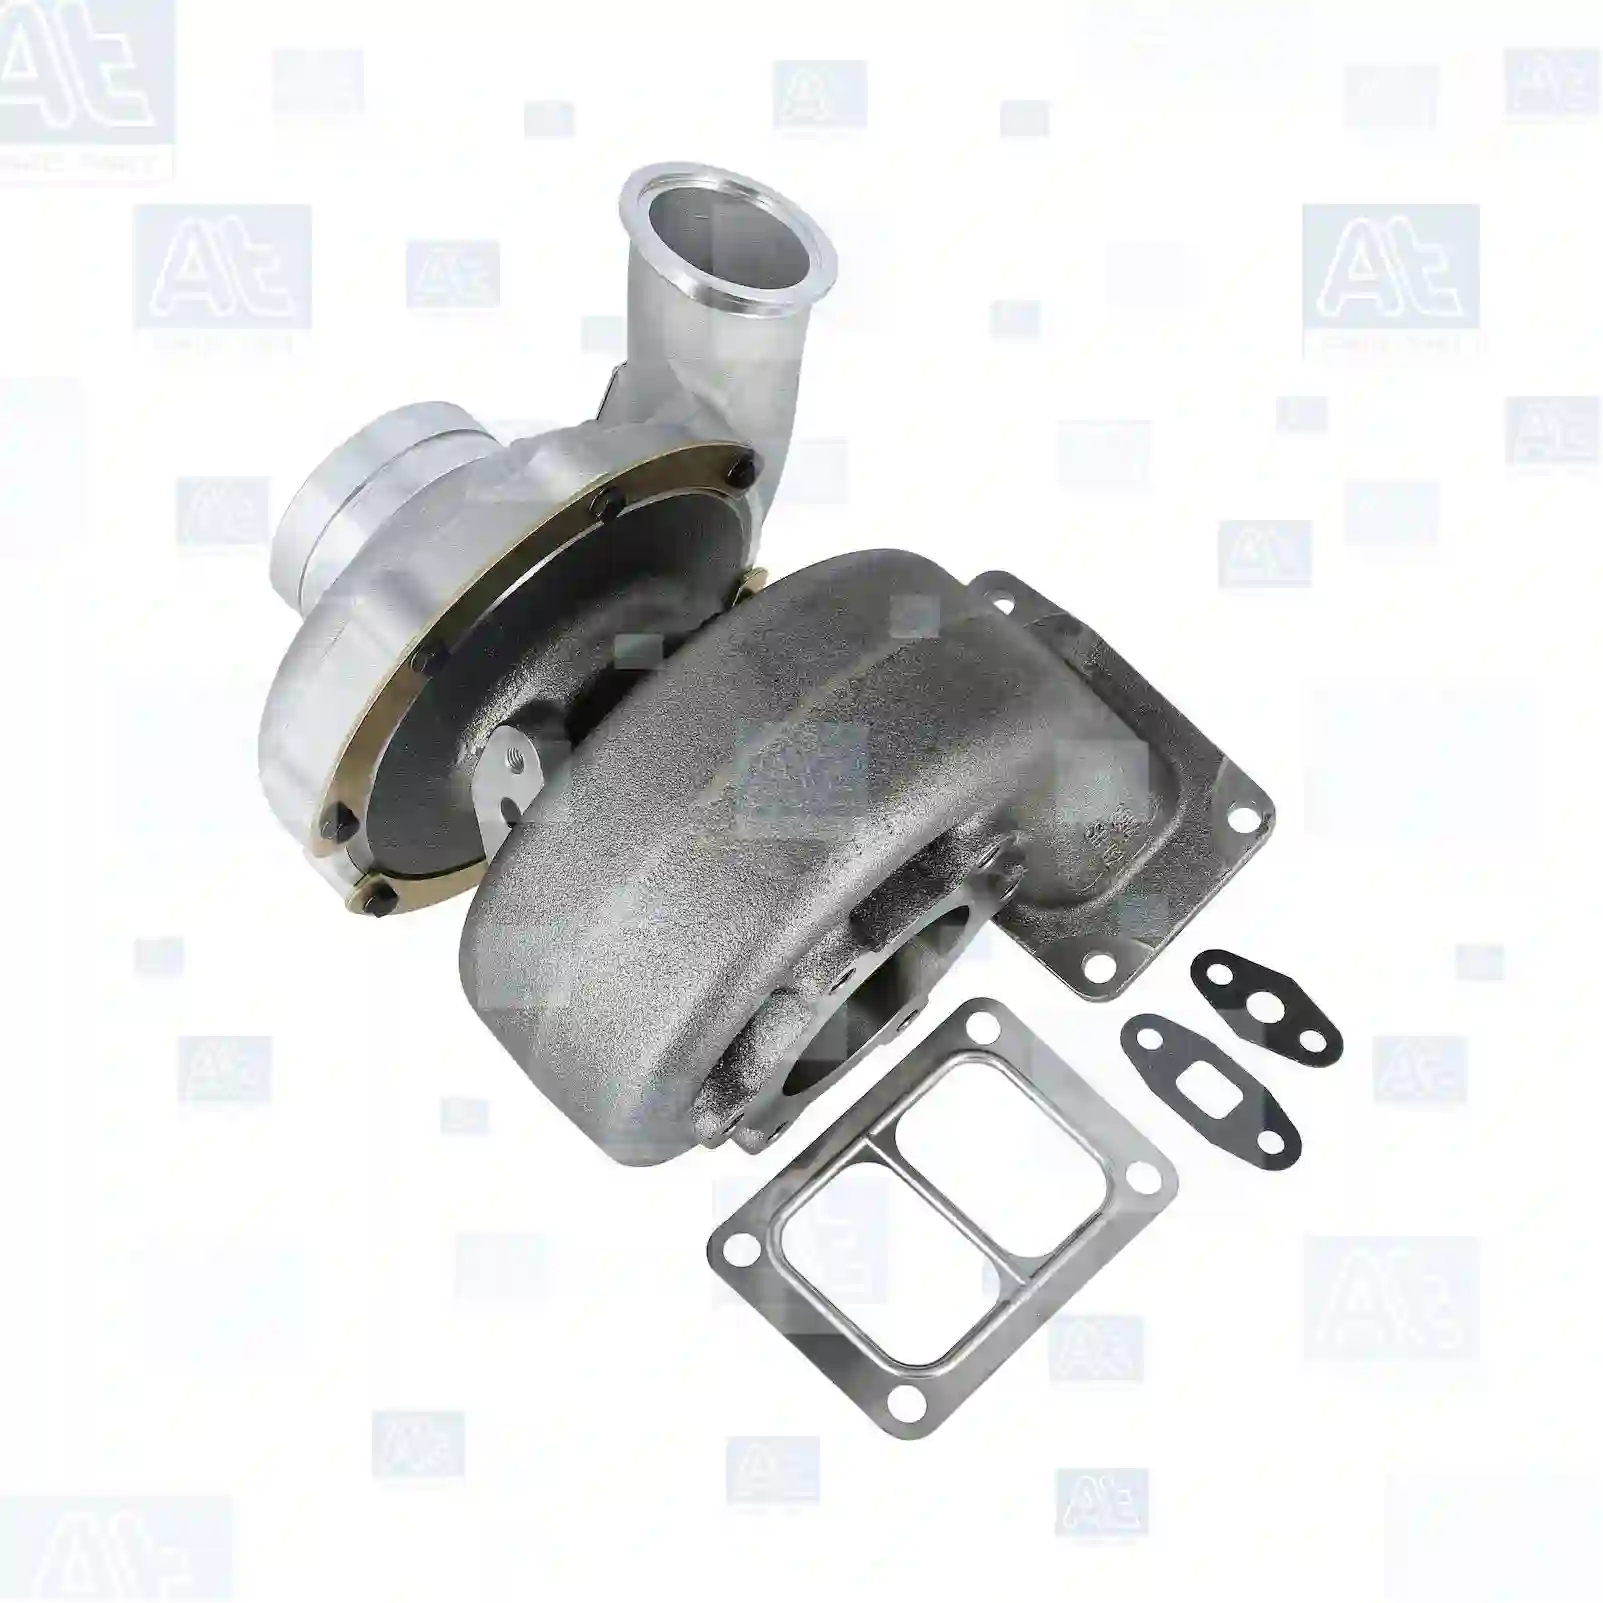 Turbocharger, with gasket kit, 77700950, 04818600, 04819761, 04819794, 04840879, 04847181, 04854264, 4840879, 500373230, 500373231, 500373233, 98414561, 98429361, 98462944, 98462946, 98462947, 98488950, 99461011, 11031711, 3526008, 382690, 3826906, 3826911, 468922, 470109, 470509, 470779, 470931, 470932, 470943, 470944, 478030, 478122, 478522, 478673, 478794, 478795, 478995, 5001912, 5002779, 5002885, 5003369, 5003370, 6888576, 8112299 ||  77700950 At Spare Part | Engine, Accelerator Pedal, Camshaft, Connecting Rod, Crankcase, Crankshaft, Cylinder Head, Engine Suspension Mountings, Exhaust Manifold, Exhaust Gas Recirculation, Filter Kits, Flywheel Housing, General Overhaul Kits, Engine, Intake Manifold, Oil Cleaner, Oil Cooler, Oil Filter, Oil Pump, Oil Sump, Piston & Liner, Sensor & Switch, Timing Case, Turbocharger, Cooling System, Belt Tensioner, Coolant Filter, Coolant Pipe, Corrosion Prevention Agent, Drive, Expansion Tank, Fan, Intercooler, Monitors & Gauges, Radiator, Thermostat, V-Belt / Timing belt, Water Pump, Fuel System, Electronical Injector Unit, Feed Pump, Fuel Filter, cpl., Fuel Gauge Sender,  Fuel Line, Fuel Pump, Fuel Tank, Injection Line Kit, Injection Pump, Exhaust System, Clutch & Pedal, Gearbox, Propeller Shaft, Axles, Brake System, Hubs & Wheels, Suspension, Leaf Spring, Universal Parts / Accessories, Steering, Electrical System, Cabin Turbocharger, with gasket kit, 77700950, 04818600, 04819761, 04819794, 04840879, 04847181, 04854264, 4840879, 500373230, 500373231, 500373233, 98414561, 98429361, 98462944, 98462946, 98462947, 98488950, 99461011, 11031711, 3526008, 382690, 3826906, 3826911, 468922, 470109, 470509, 470779, 470931, 470932, 470943, 470944, 478030, 478122, 478522, 478673, 478794, 478795, 478995, 5001912, 5002779, 5002885, 5003369, 5003370, 6888576, 8112299 ||  77700950 At Spare Part | Engine, Accelerator Pedal, Camshaft, Connecting Rod, Crankcase, Crankshaft, Cylinder Head, Engine Suspension Mountings, Exhaust Manifold, Exhaust Gas Recirculation, Filter Kits, Flywheel Housing, General Overhaul Kits, Engine, Intake Manifold, Oil Cleaner, Oil Cooler, Oil Filter, Oil Pump, Oil Sump, Piston & Liner, Sensor & Switch, Timing Case, Turbocharger, Cooling System, Belt Tensioner, Coolant Filter, Coolant Pipe, Corrosion Prevention Agent, Drive, Expansion Tank, Fan, Intercooler, Monitors & Gauges, Radiator, Thermostat, V-Belt / Timing belt, Water Pump, Fuel System, Electronical Injector Unit, Feed Pump, Fuel Filter, cpl., Fuel Gauge Sender,  Fuel Line, Fuel Pump, Fuel Tank, Injection Line Kit, Injection Pump, Exhaust System, Clutch & Pedal, Gearbox, Propeller Shaft, Axles, Brake System, Hubs & Wheels, Suspension, Leaf Spring, Universal Parts / Accessories, Steering, Electrical System, Cabin